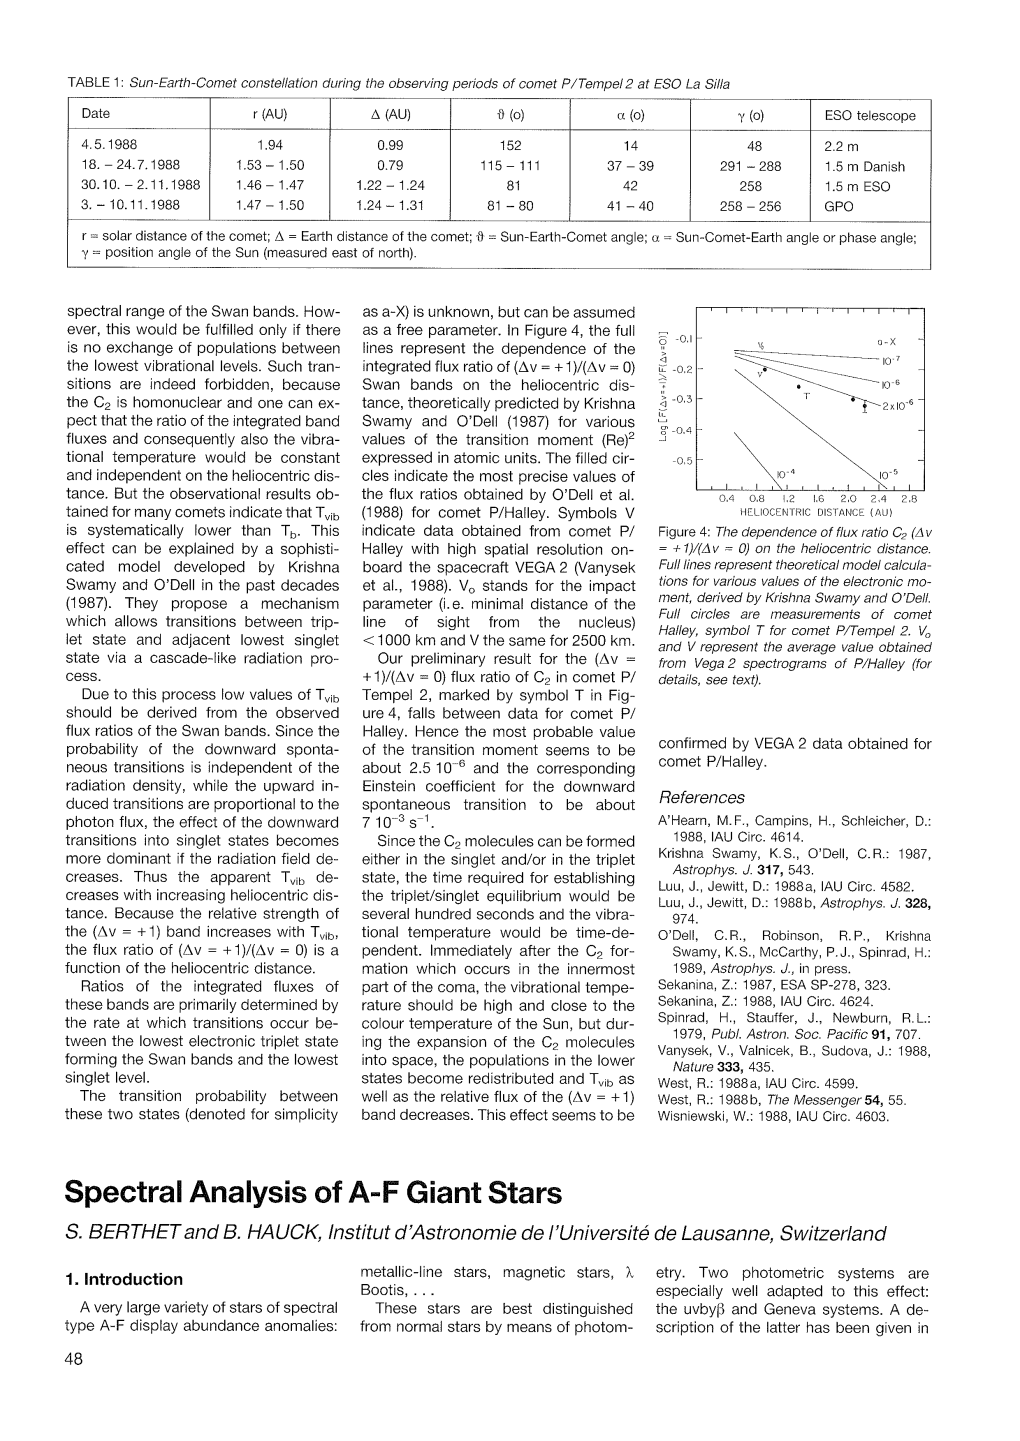 Spectral Analysis of A-F Giant Stars S